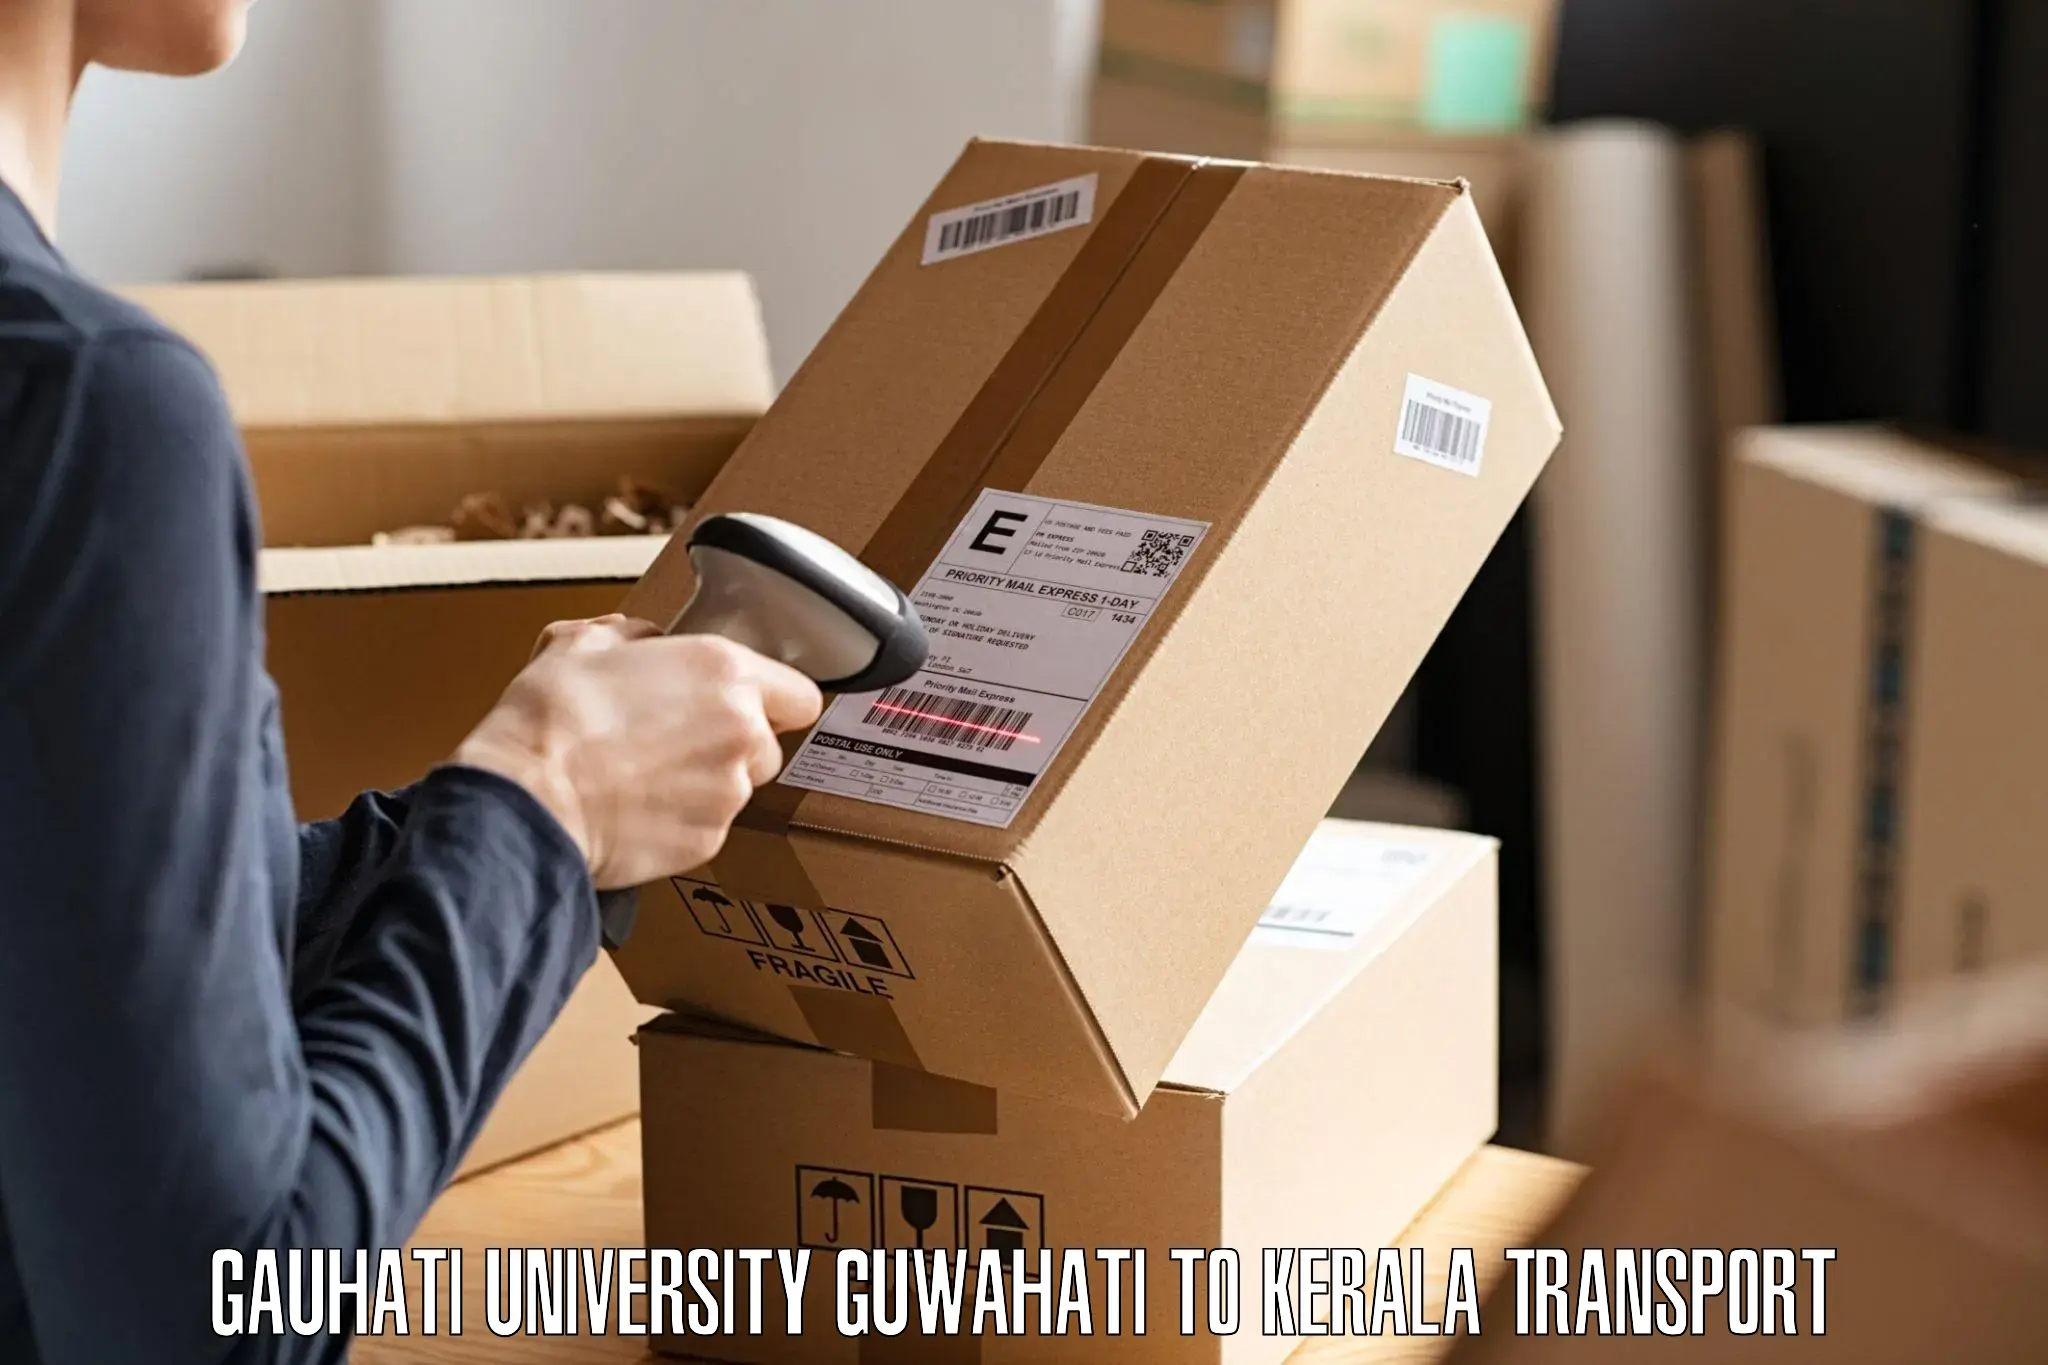 Package delivery services Gauhati University Guwahati to Haripad